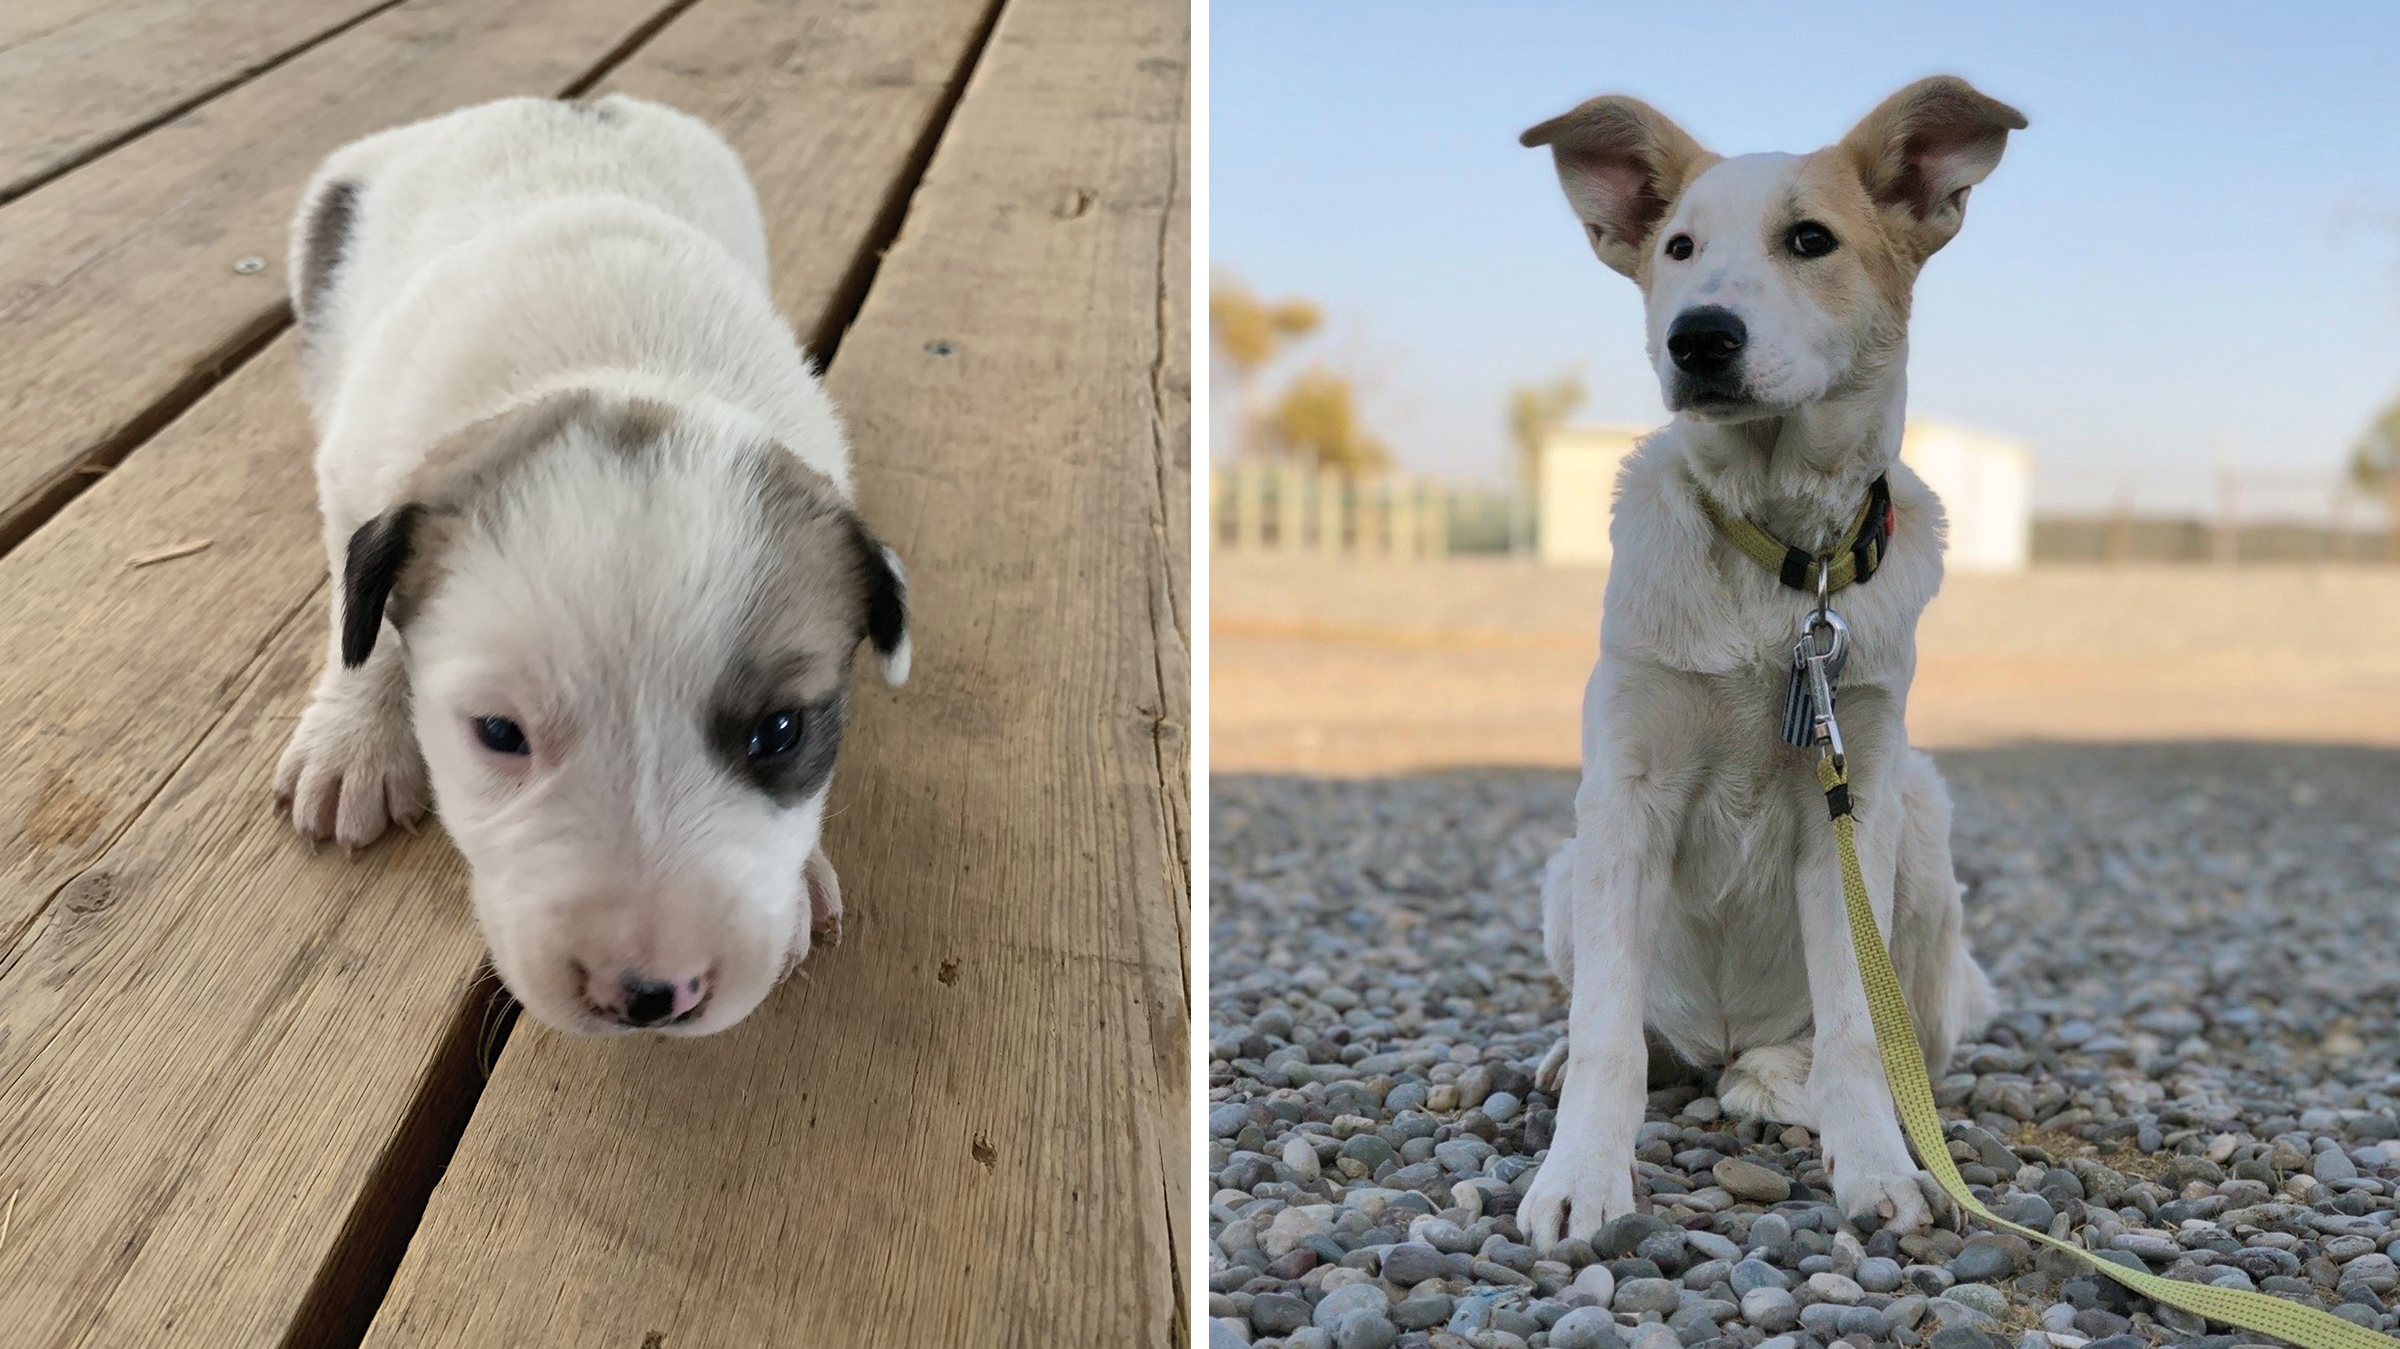 Sully the dog as a newborn puppy (left) and at a few months of age. (Courtesy SPCA International)